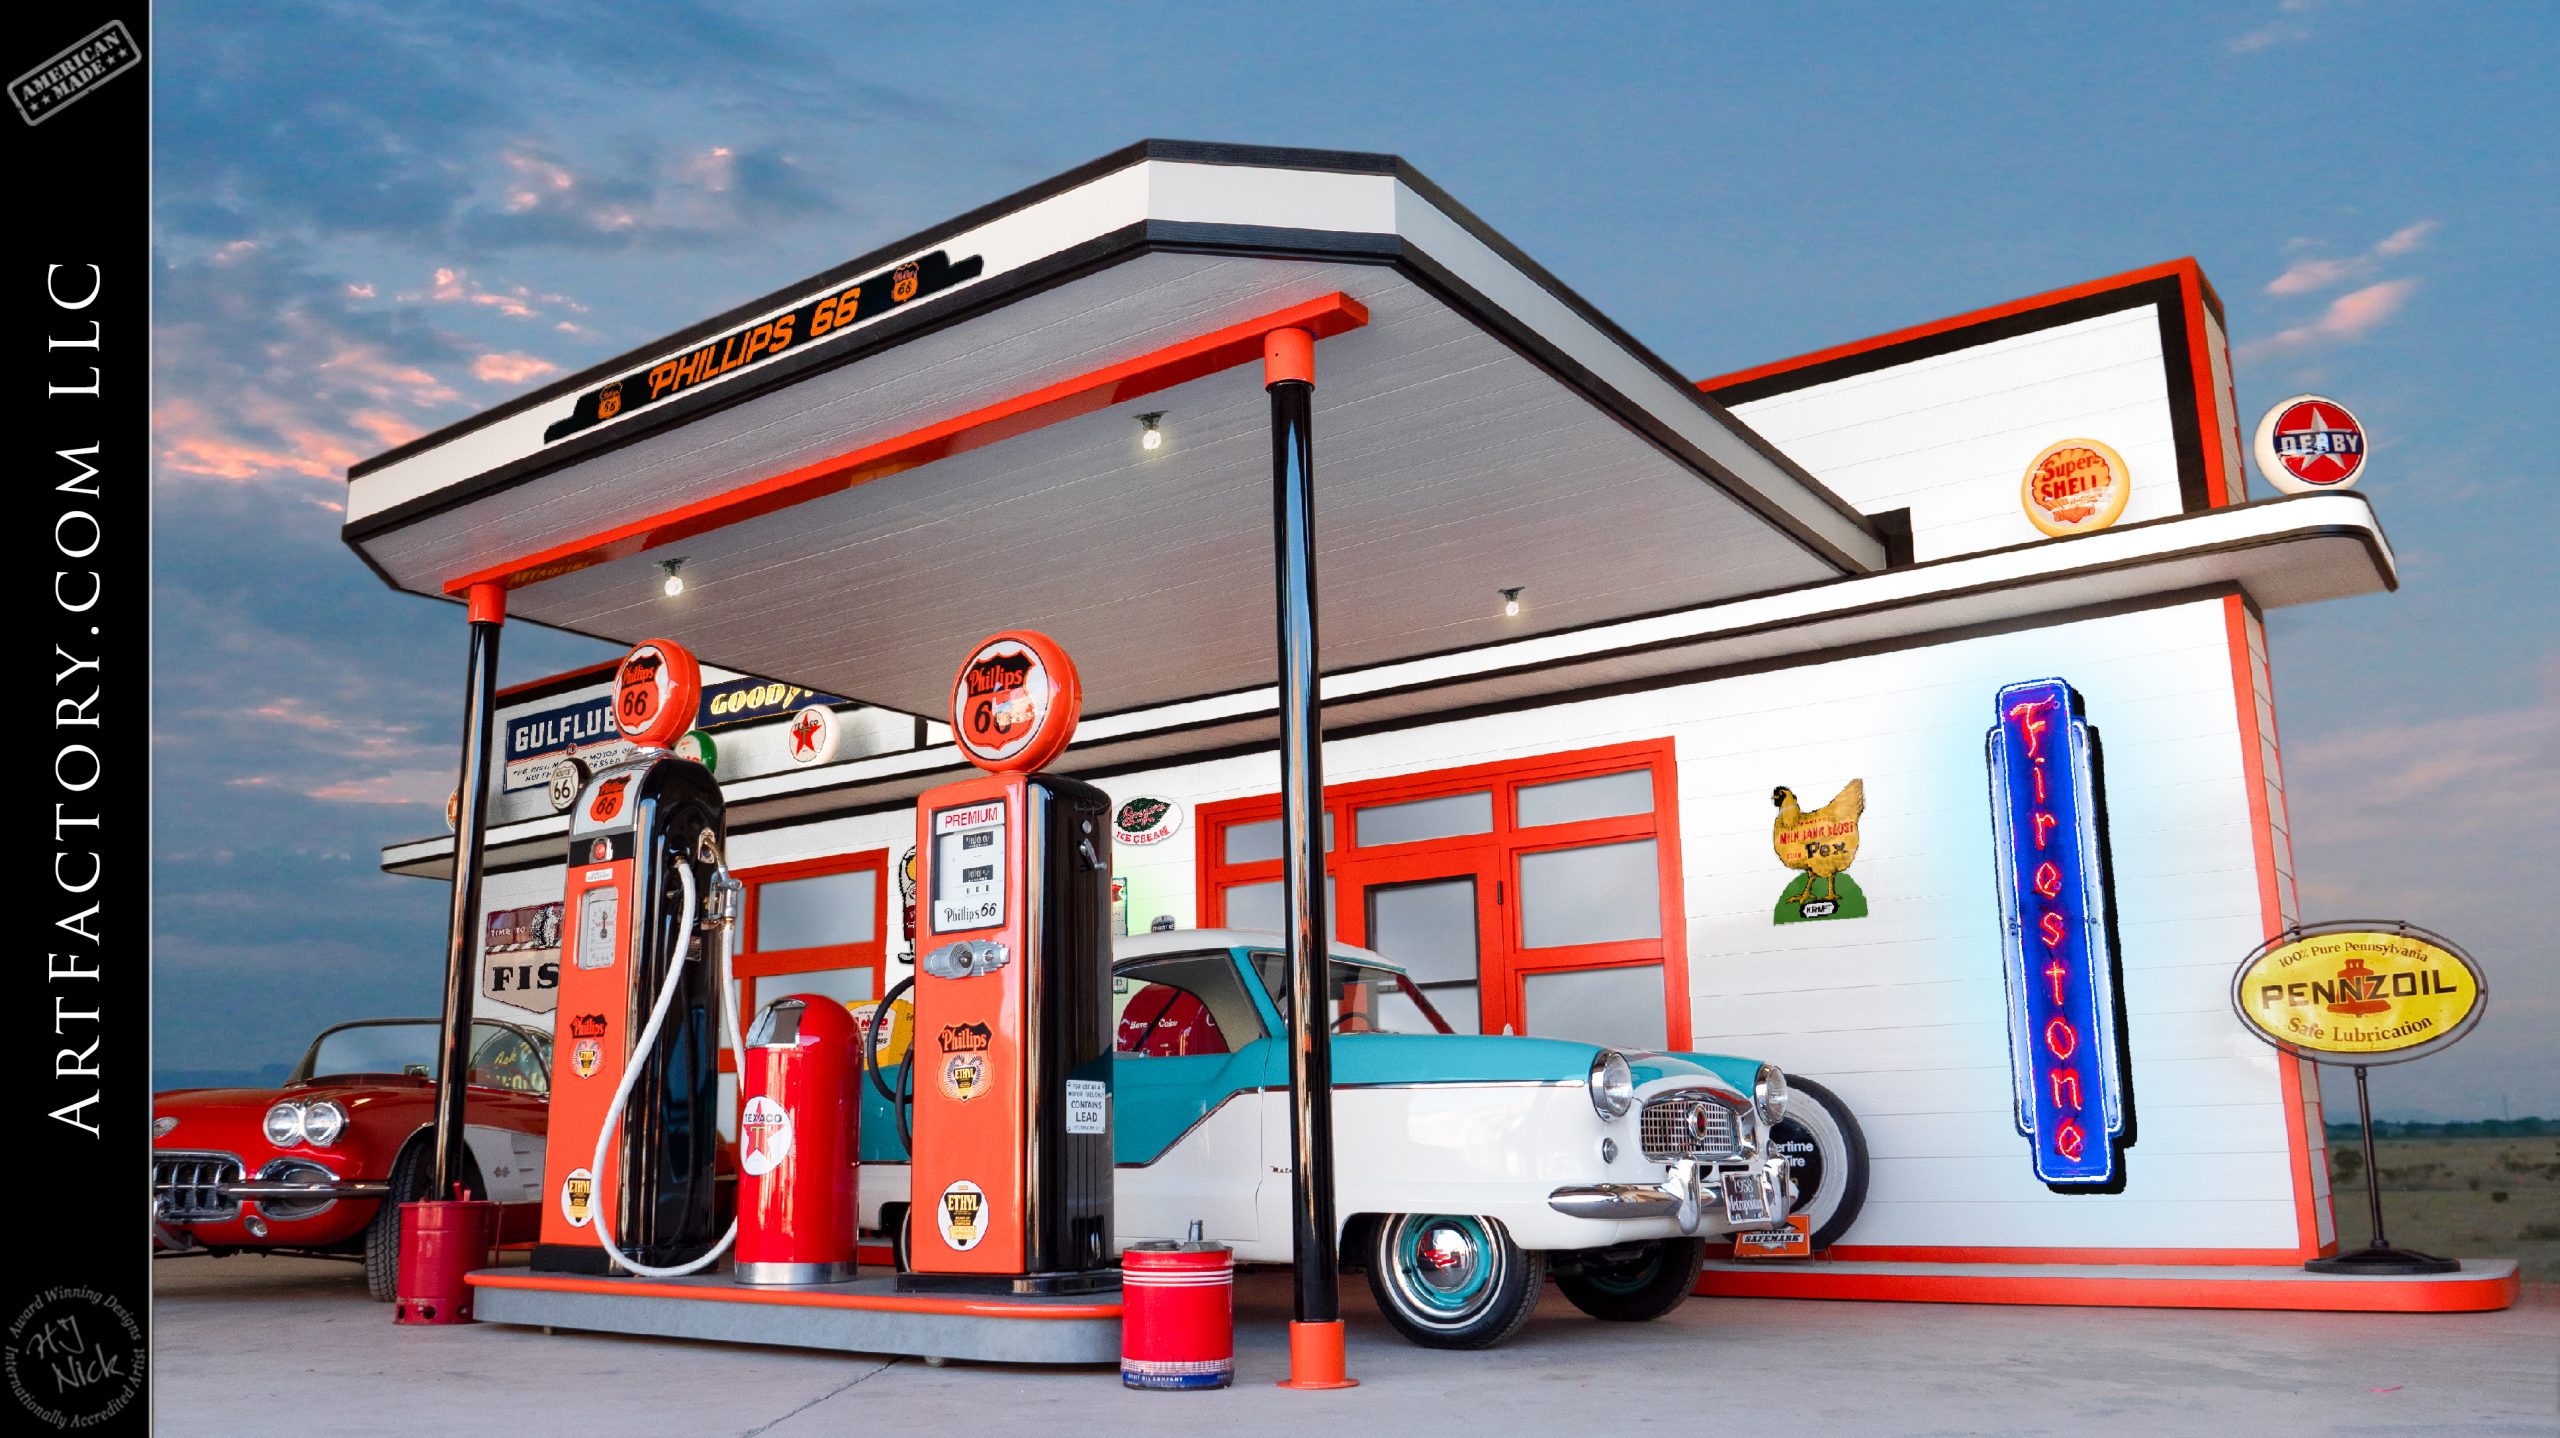 Vintage Gas Station, General Store and Garage Facades, Springfield, TN, Production